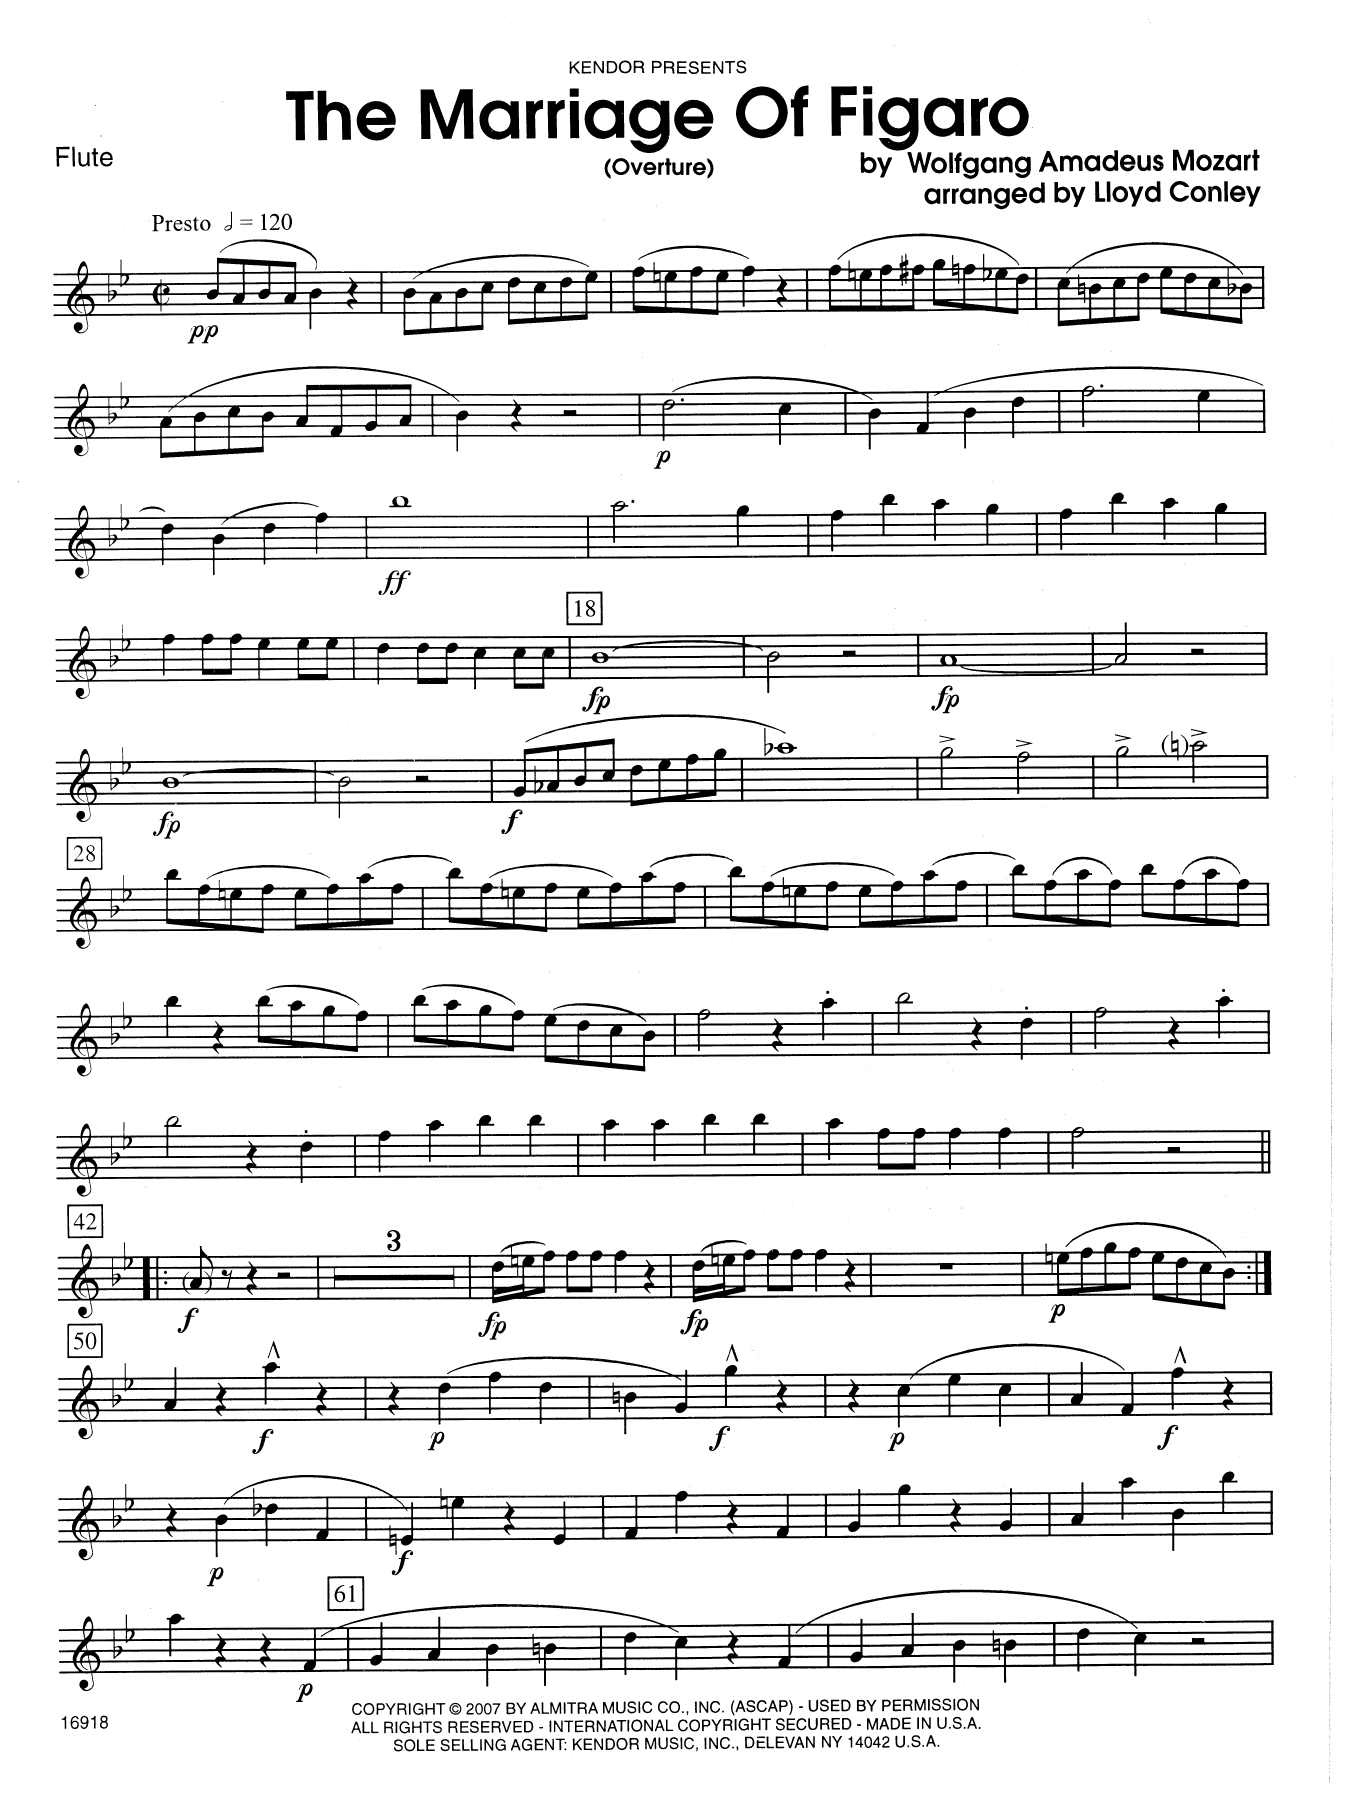 Lloyd Conley The Marriage Of Figaro (Overture) - Flute sheet music notes and chords. Download Printable PDF.